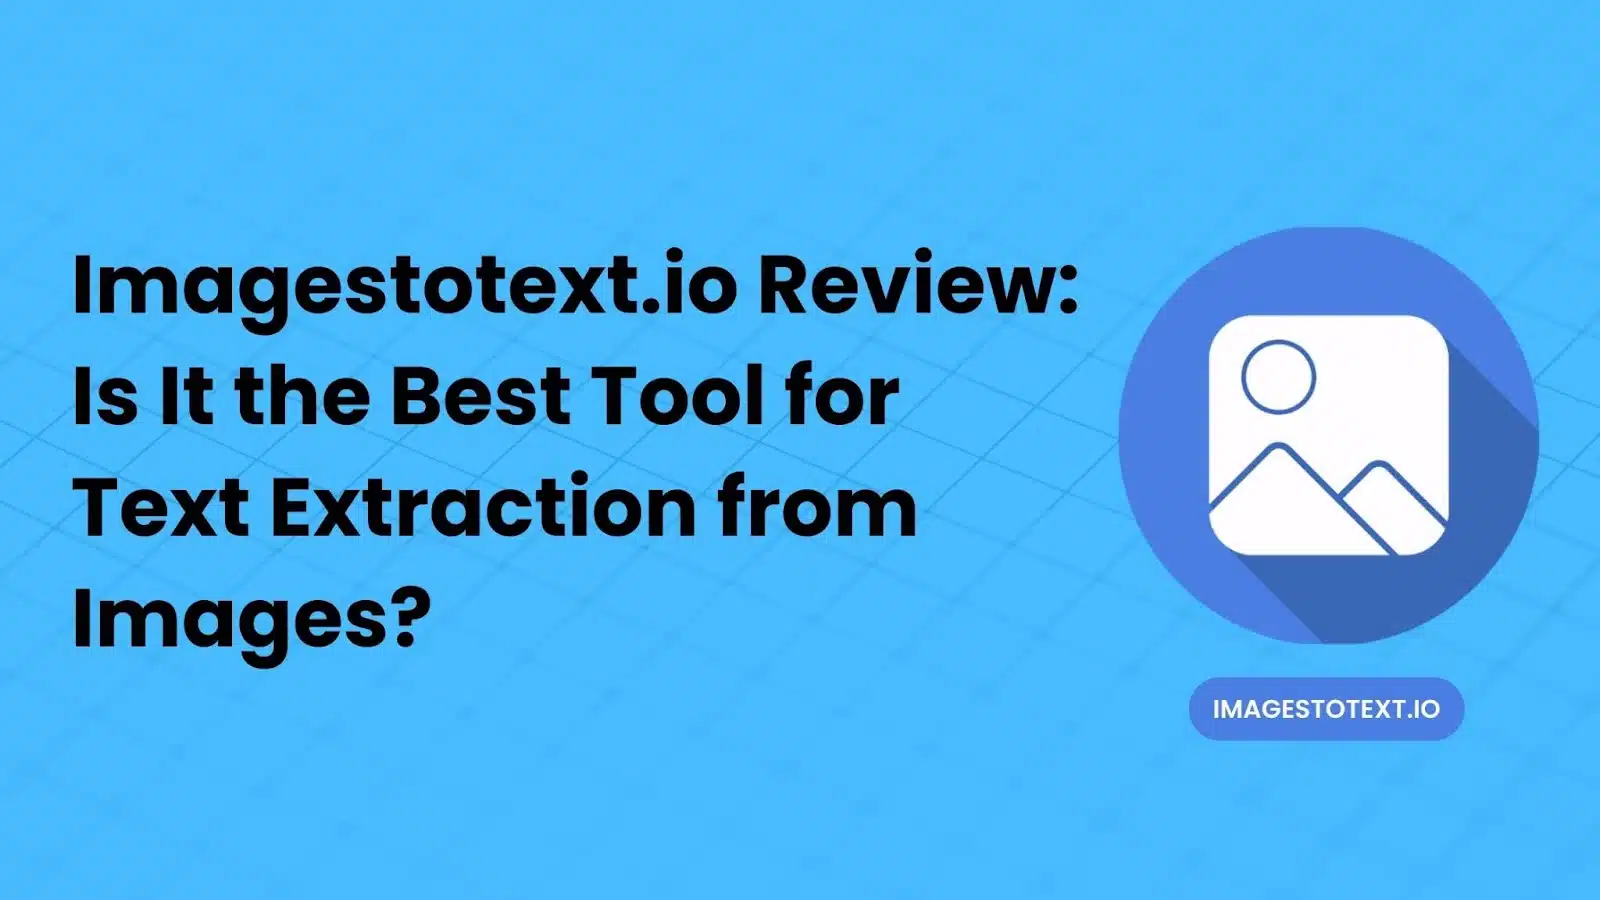 Imagestotext.io Review: Is It the Best Tool for Text Extraction from Images?